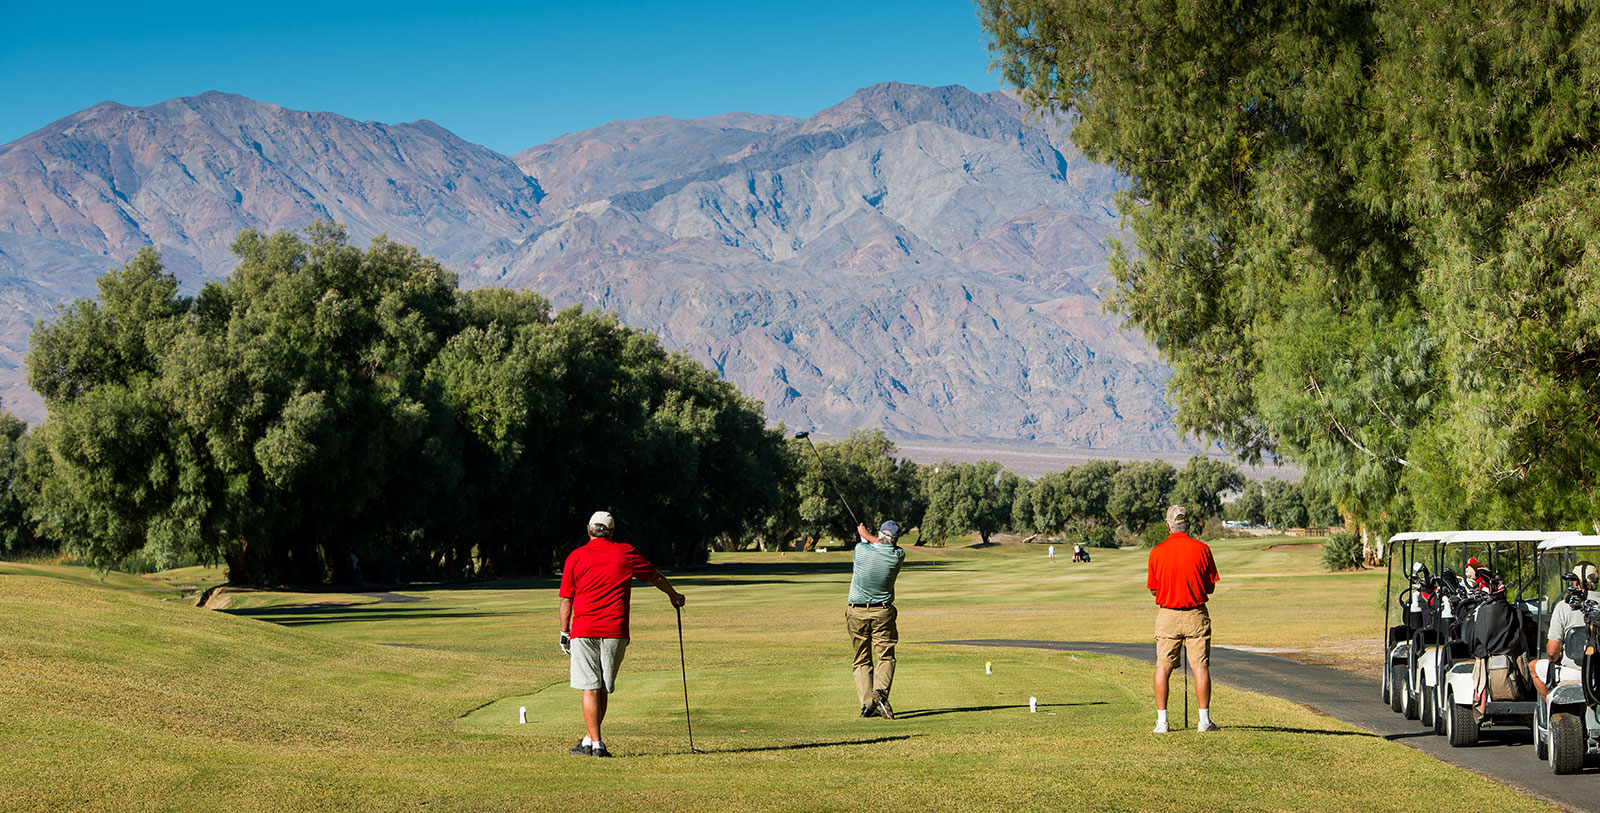 Experience a round of golf at the Furnace Creek Golf Course at Death Valley, the lowest elevation golf course in the world.